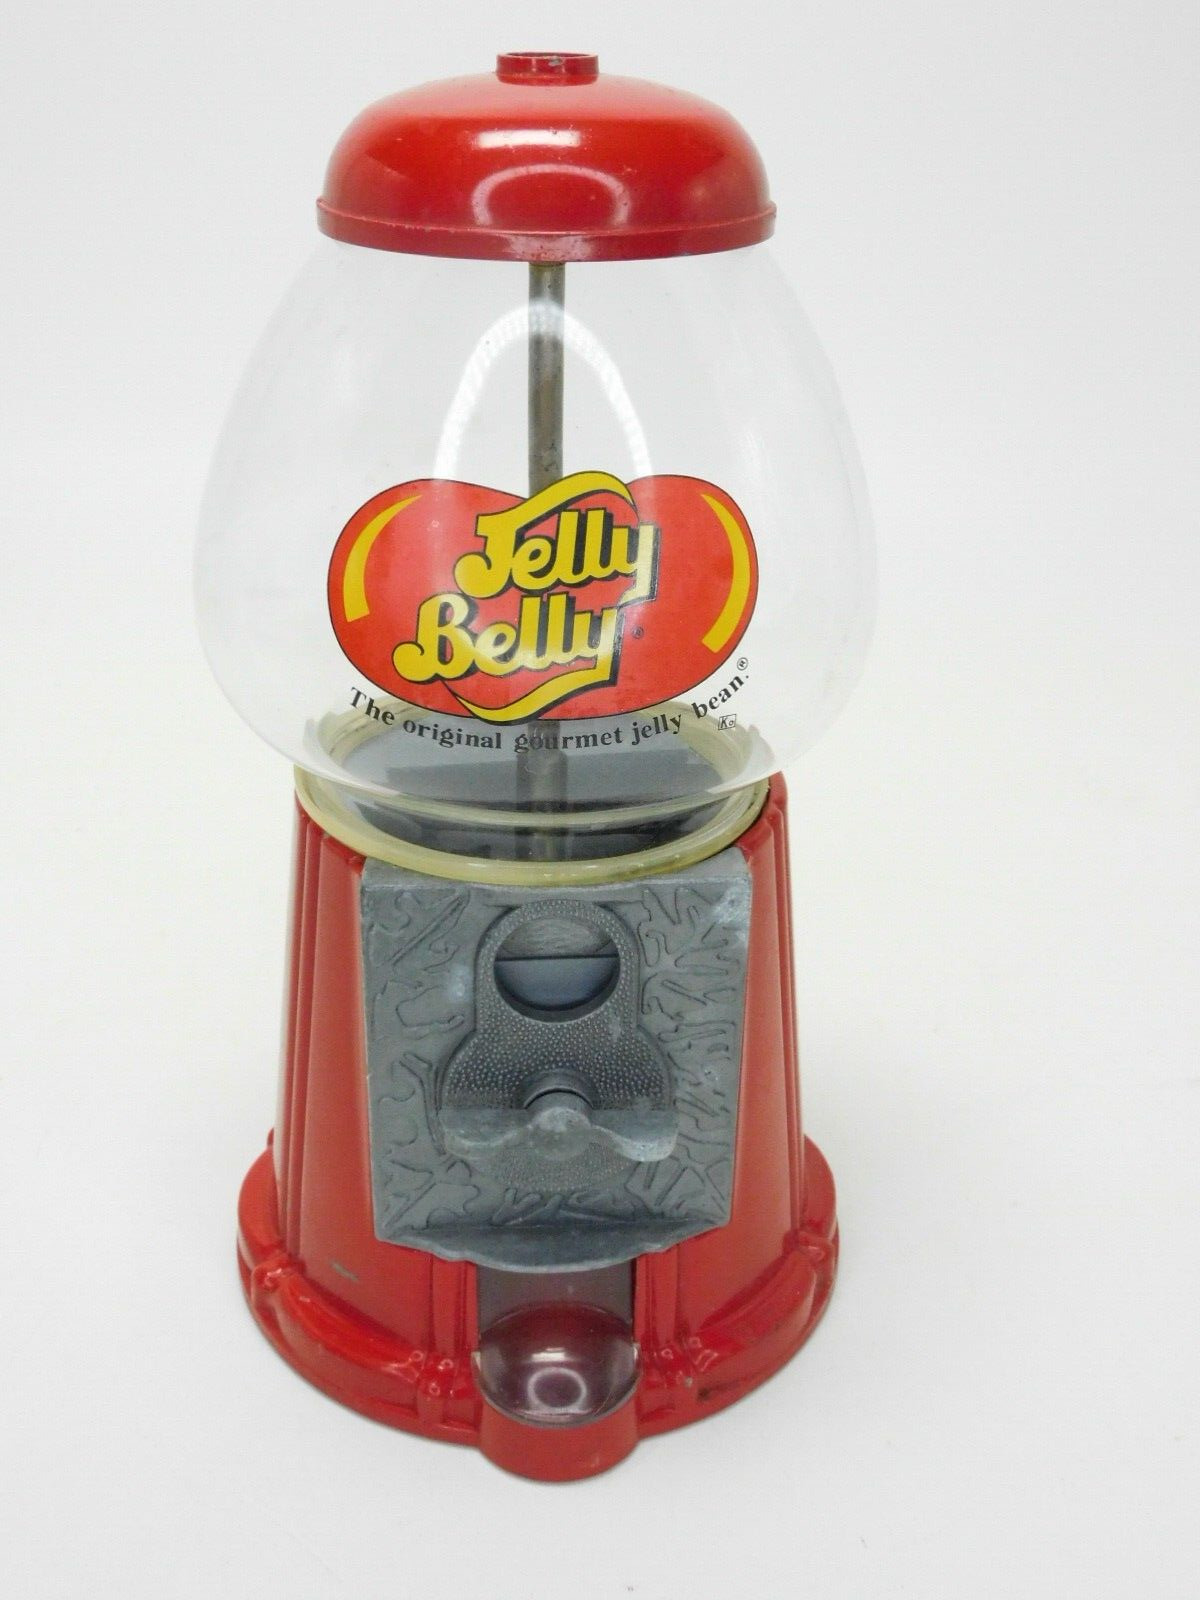 Vintage Jelly Belly Gumball Machine Jelly Bean Candy Red - Quarters